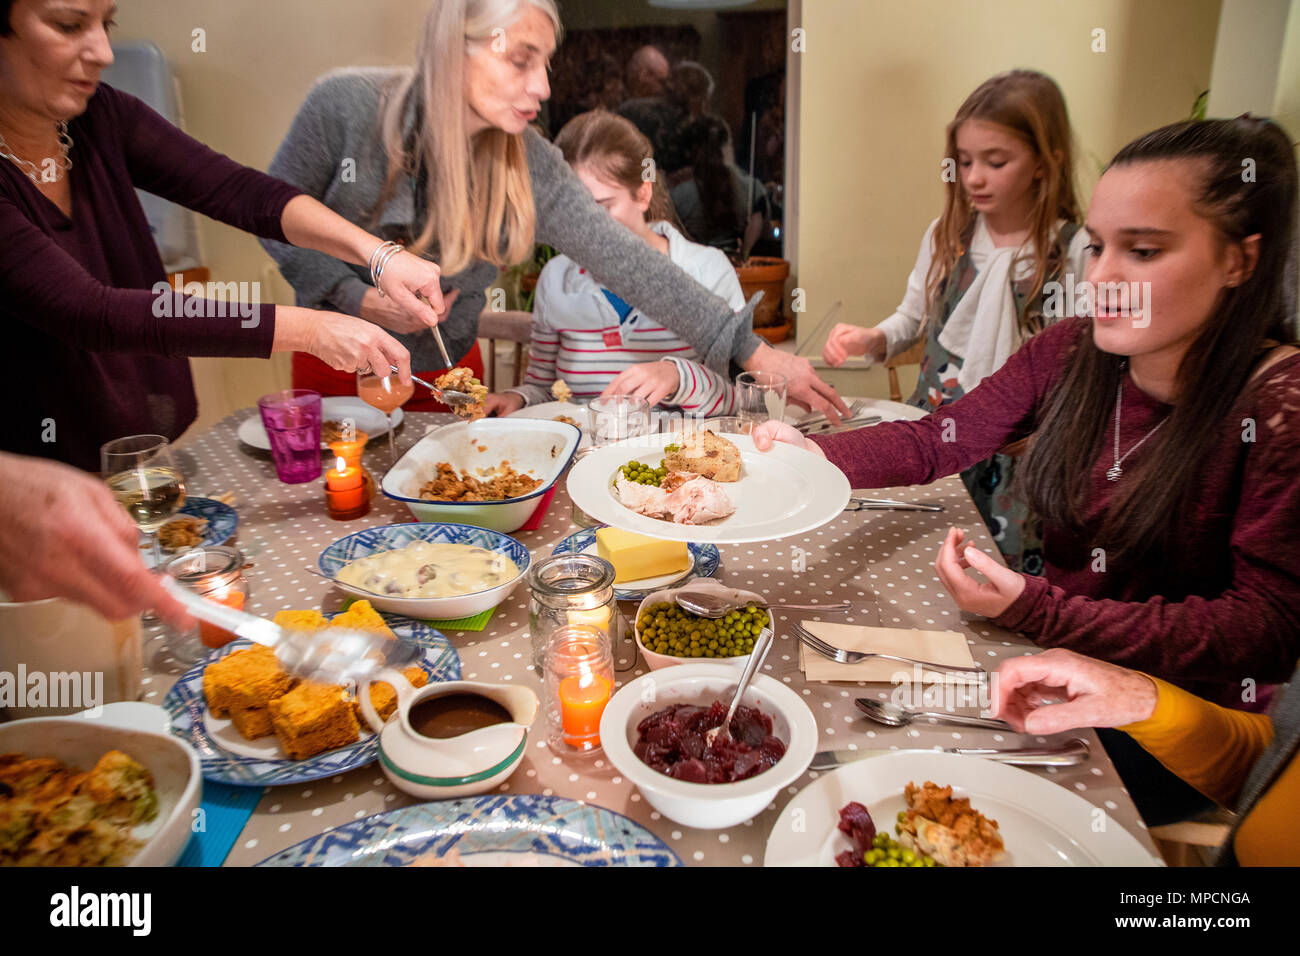 A family help themselves to a meal at Thanksgiving. Stock Photo